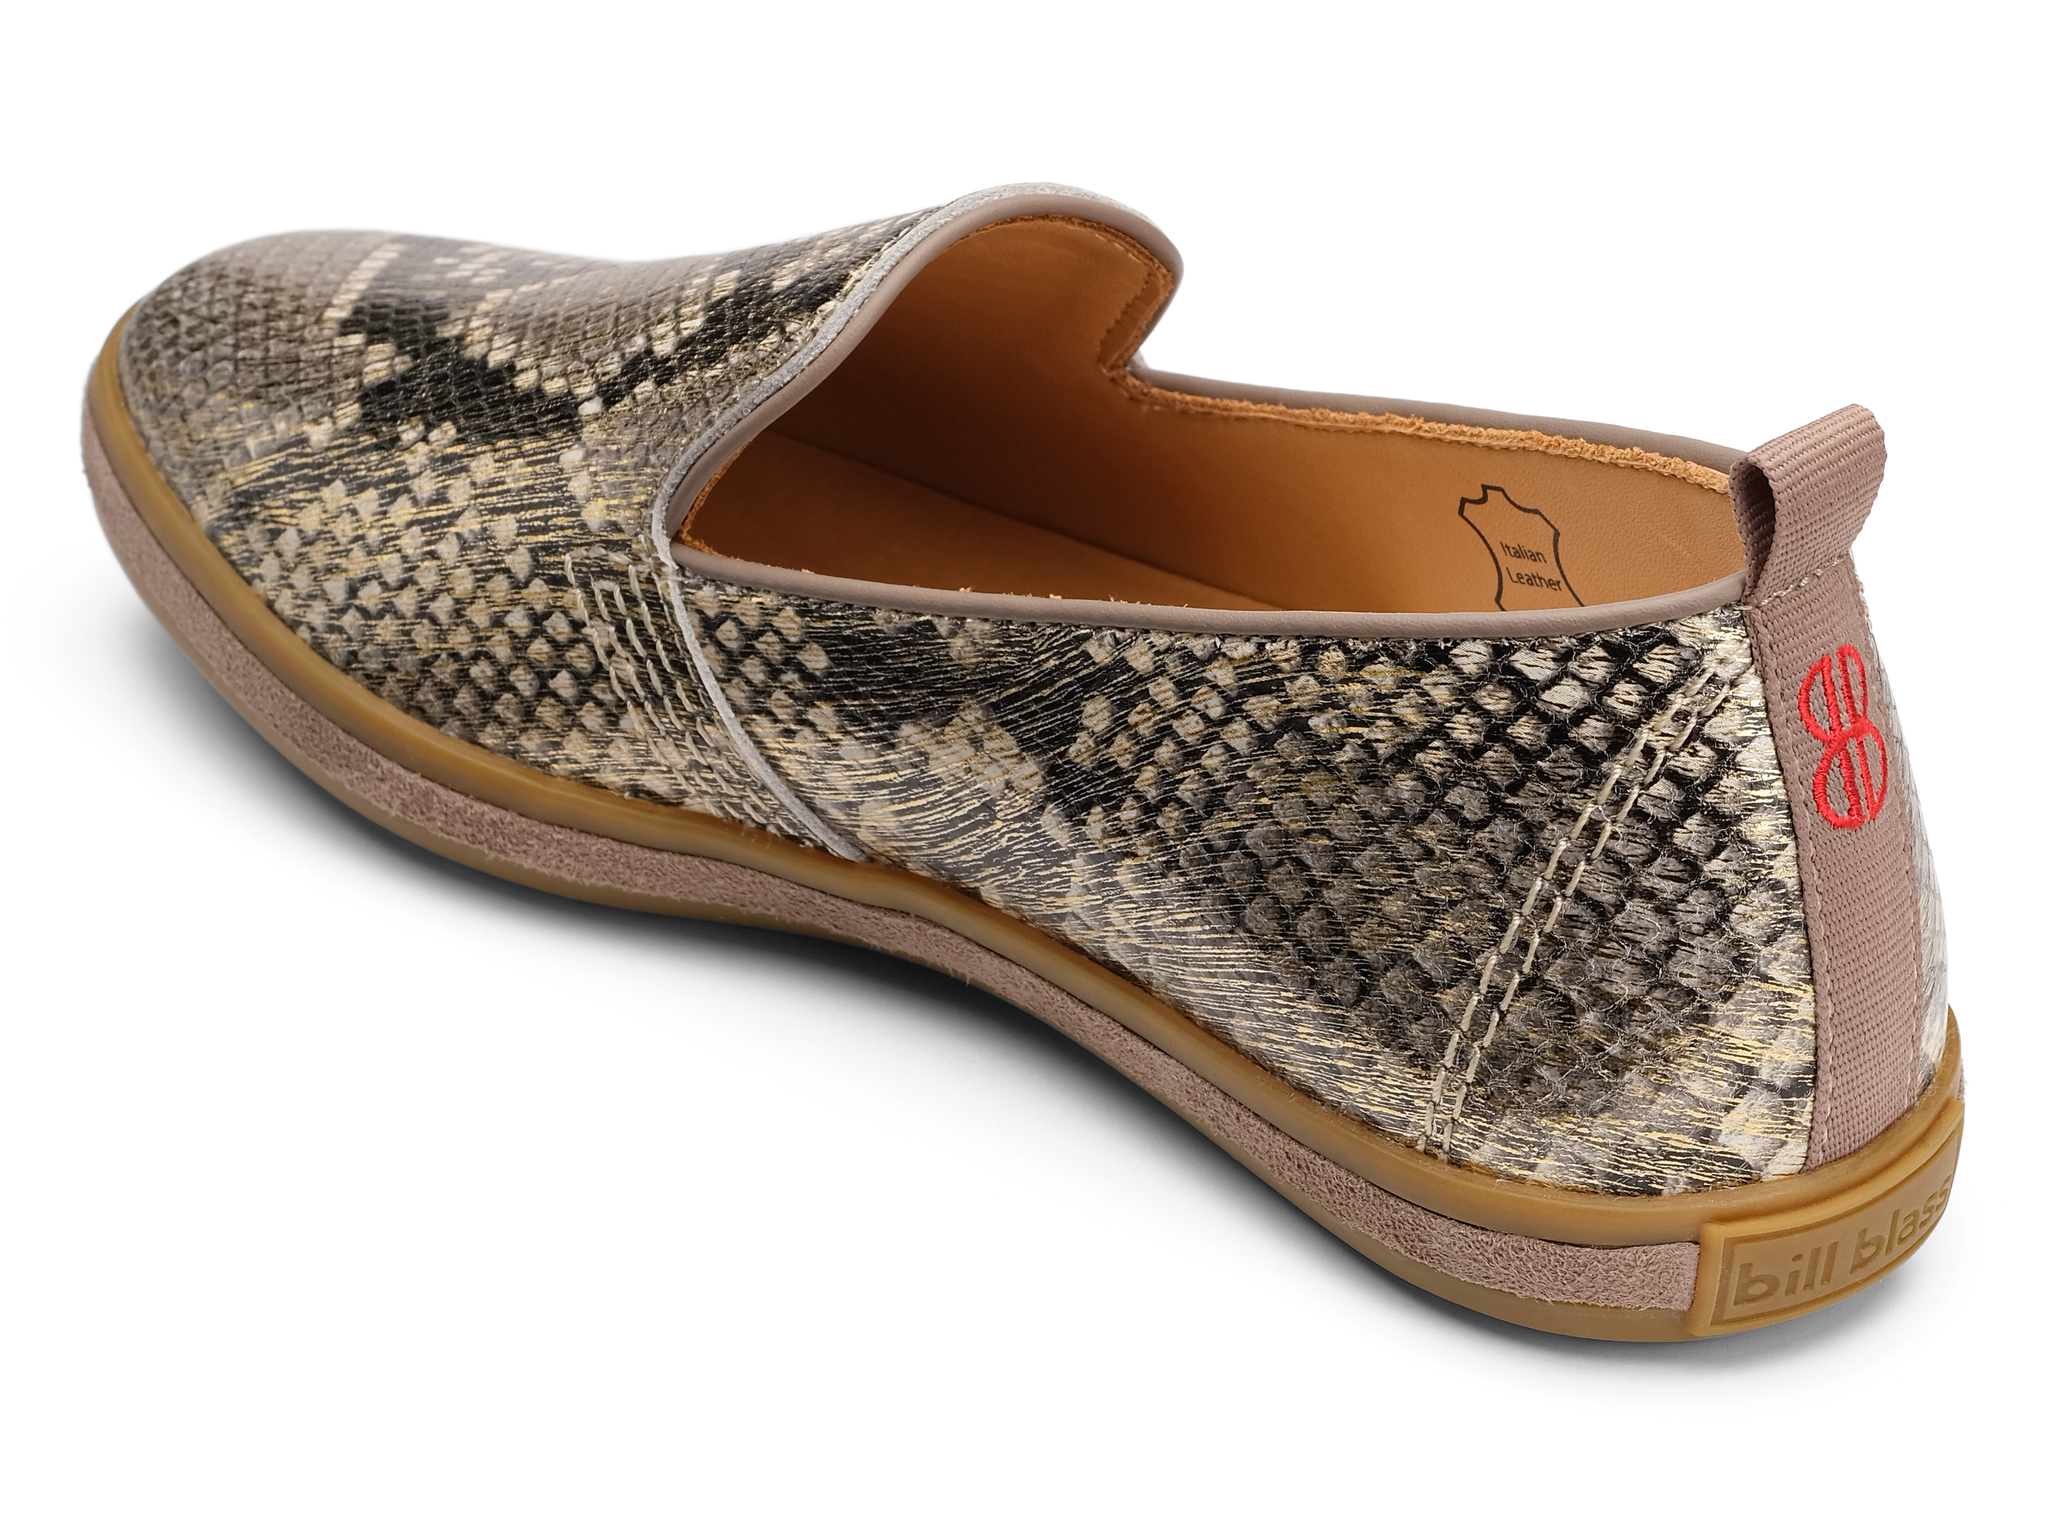 Sutton Leather Slip On - Gold Printed Snake